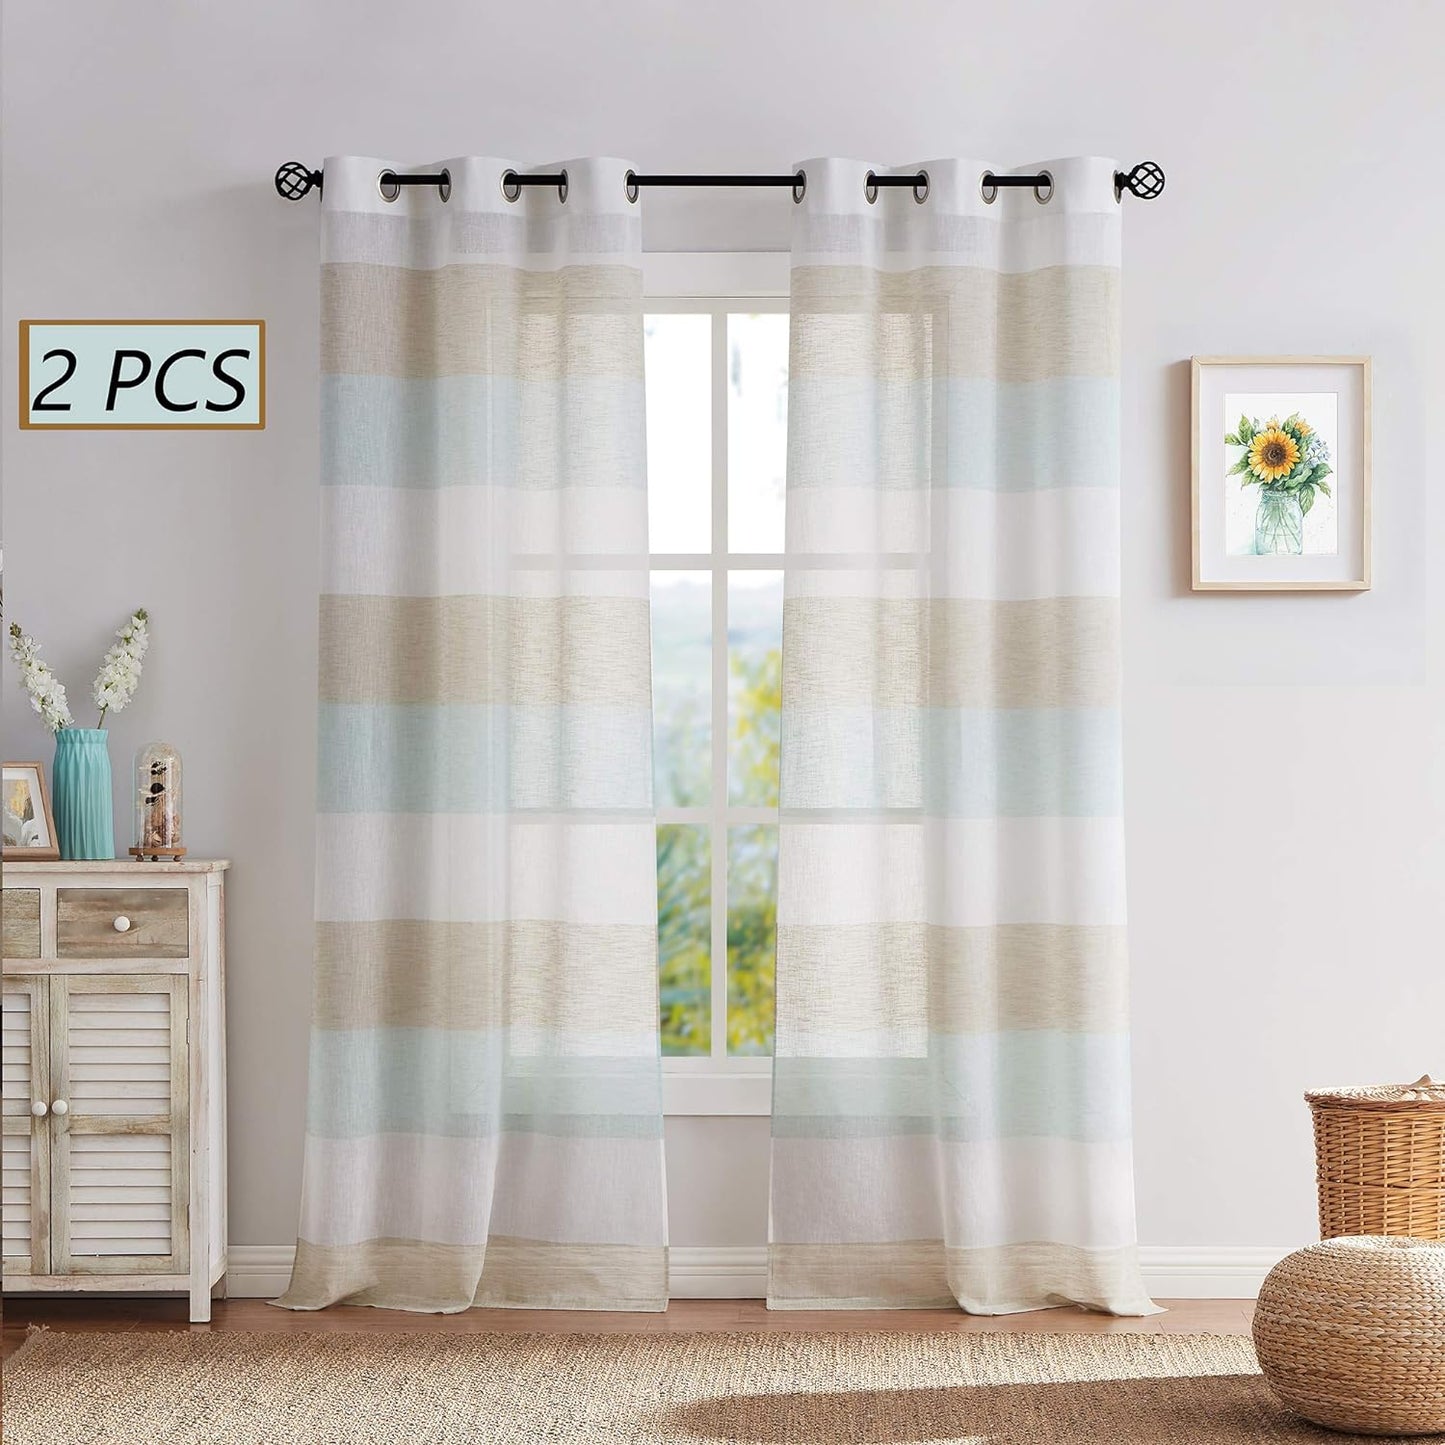 Central Park Gray Tan Stripe Sheer Color Block Window Curtain Panel Linen Window Treatment for Bedroom Living Room Farmhouse 84 Inches Long with Grommets, 2 Panel Rustic Drapes  Central Park Tan/Spa Blue 40"X72"X2 